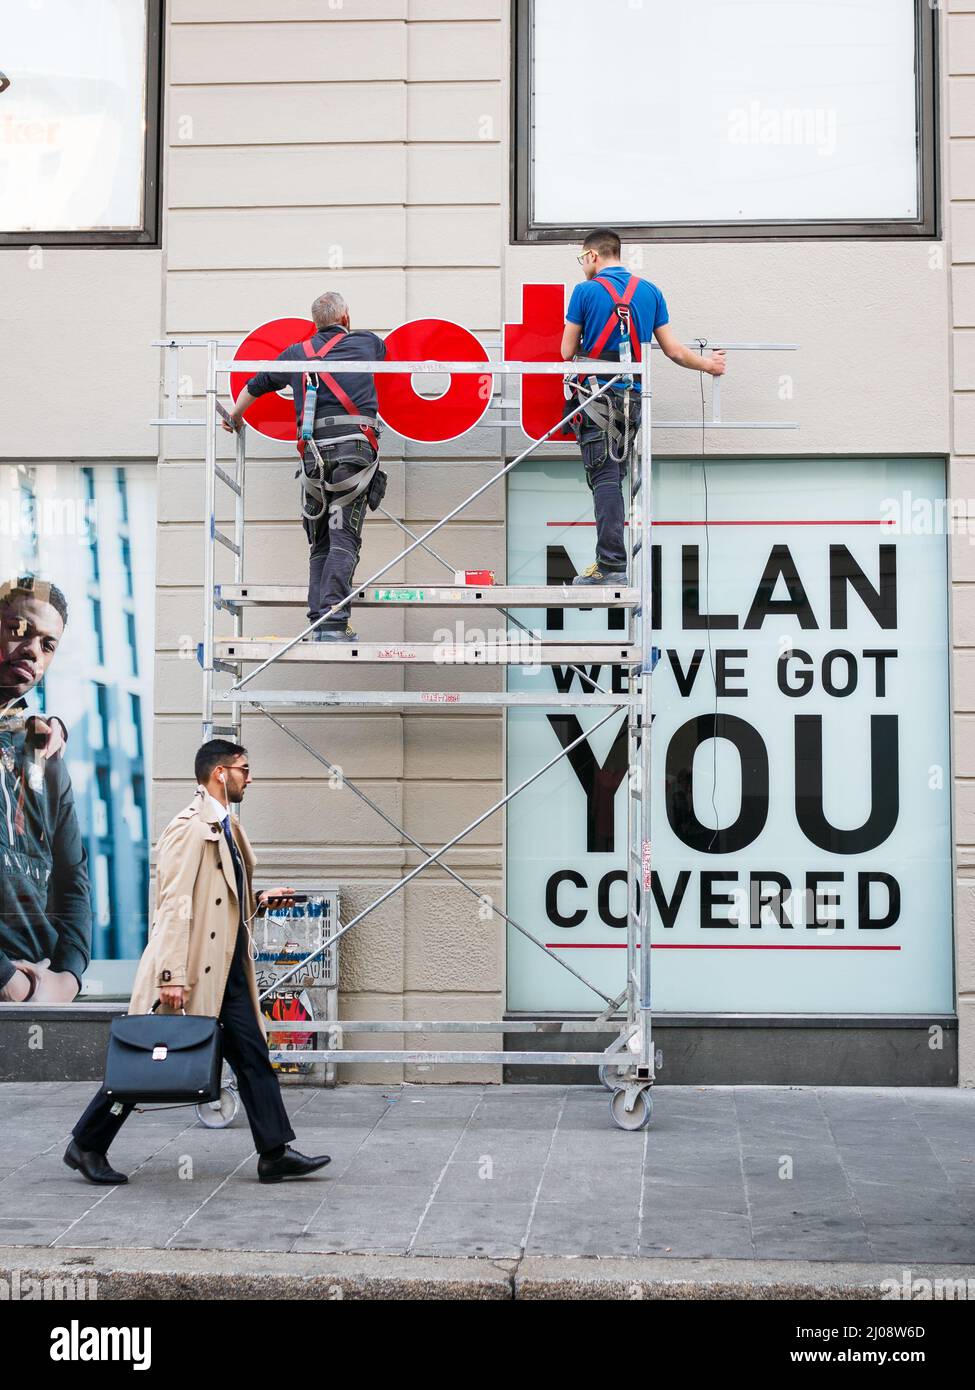 Milan, Italy. 03rd Oct, 2019. A business man walks past two men working on a business sign in Milan on March 31, 2019. Corso Buenos Aires is one of the longest shopping street in Europe and features the highest concentration of stores. (Photo by Alexander Pohl/Sipa USA) Credit: Sipa USA/Alamy Live News Stock Photo